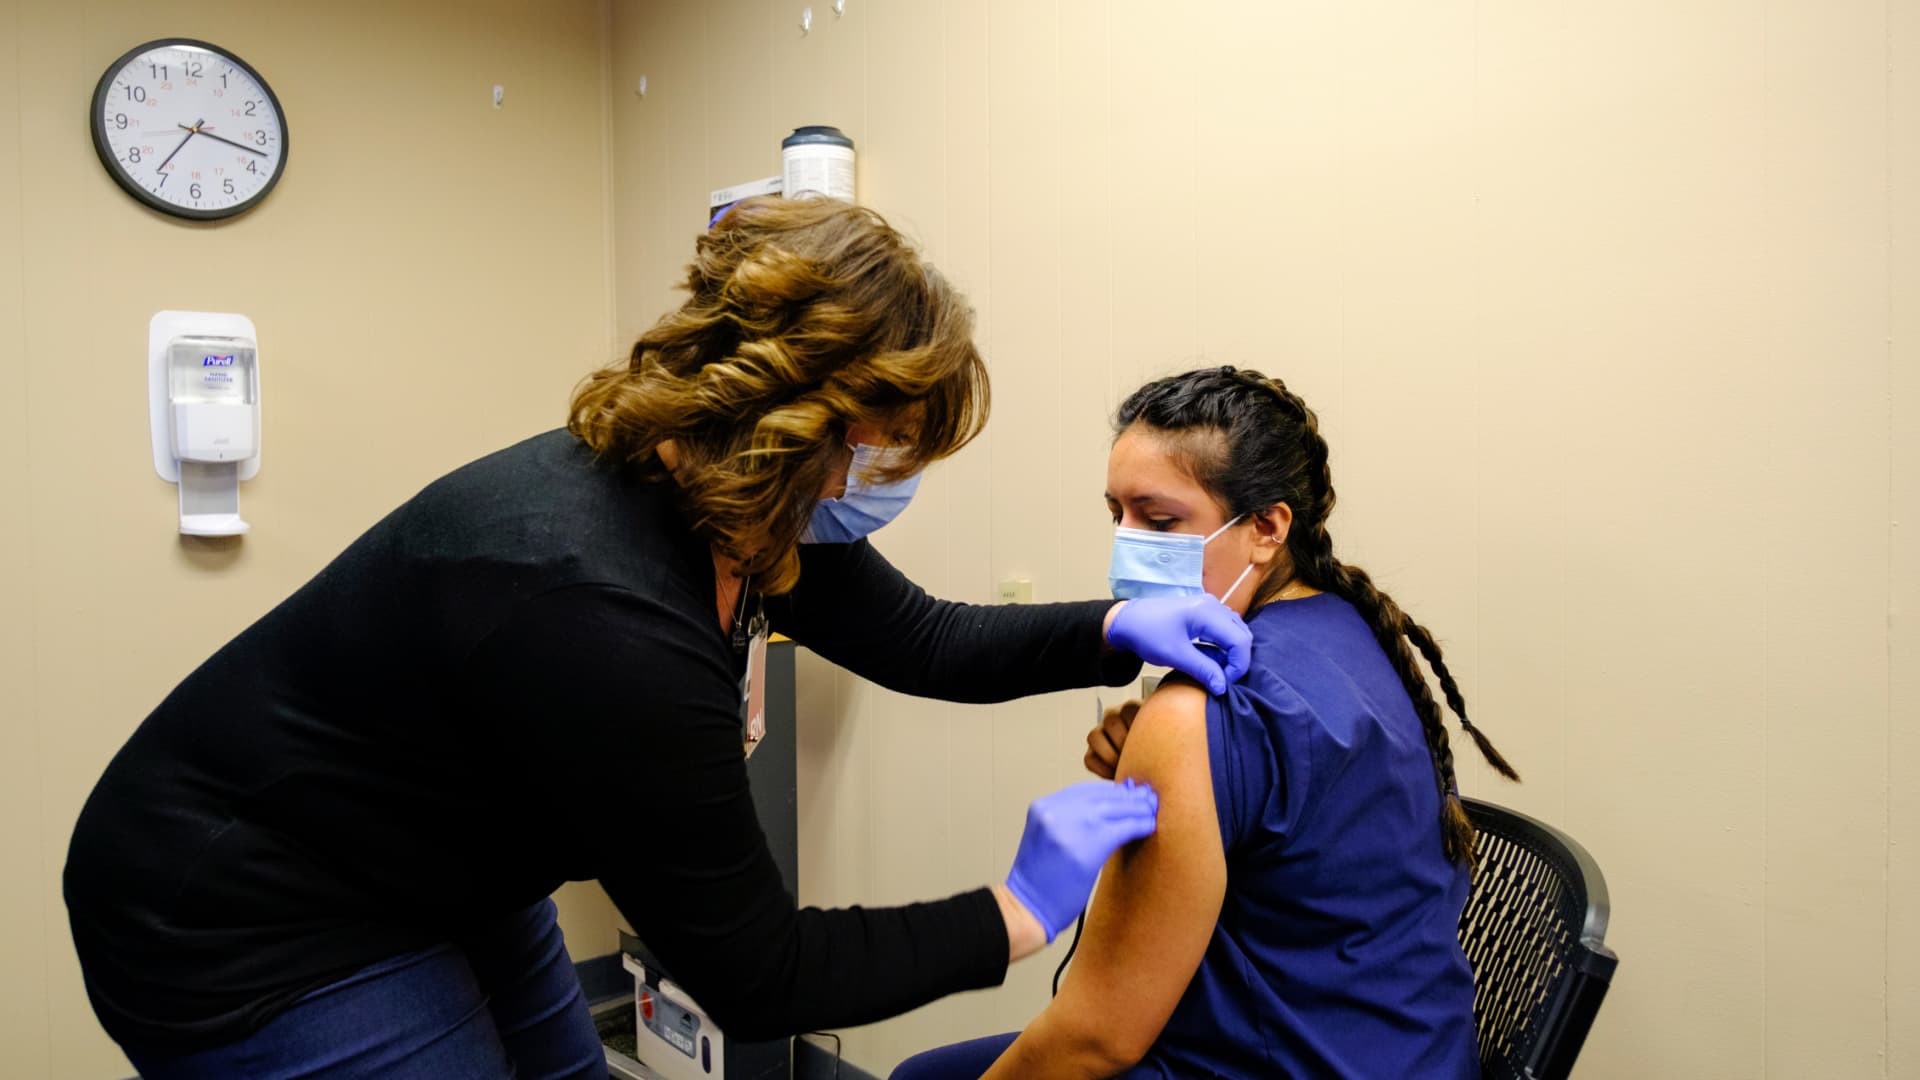 Zaira Hernandez, front line Healthcare worker is vaccinated with the Pfizer covid-19 vaccine by Amy Meek at IU Health Bloomington.